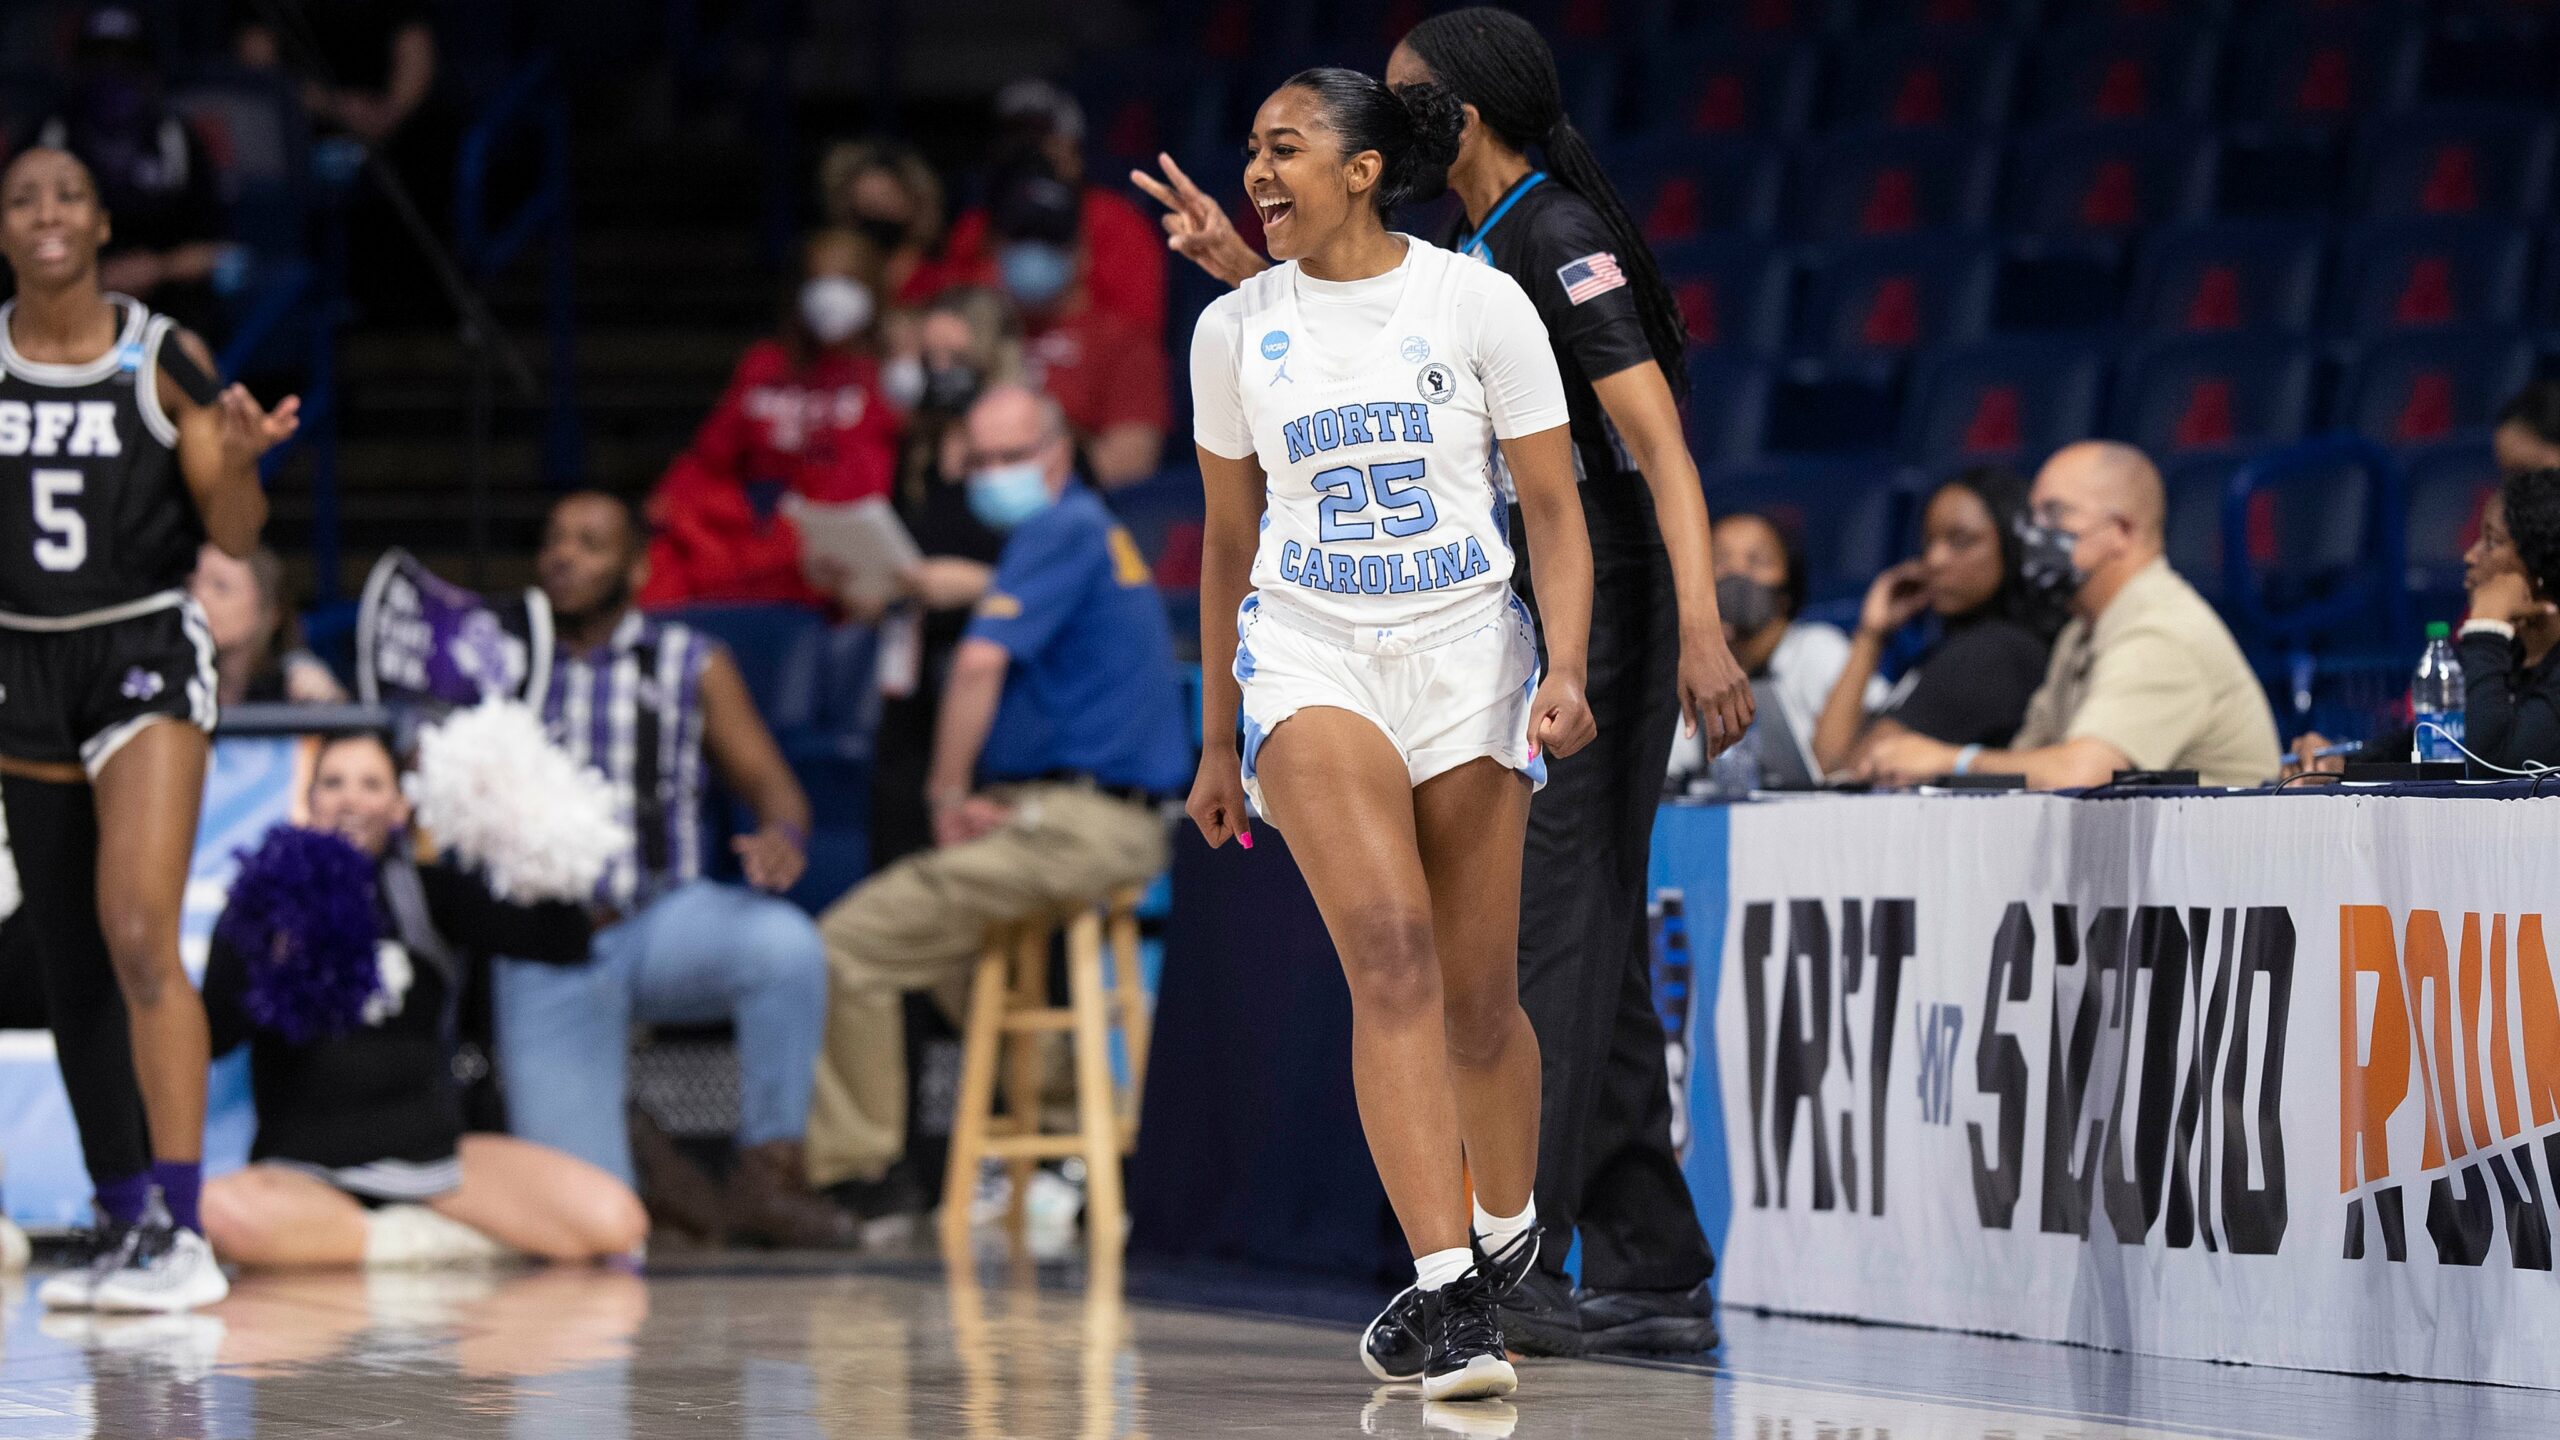 UNC Women's Basketball And Arizona To Meet Monday In NCAA Second Round - Tar Heel Times - 3/21/2022